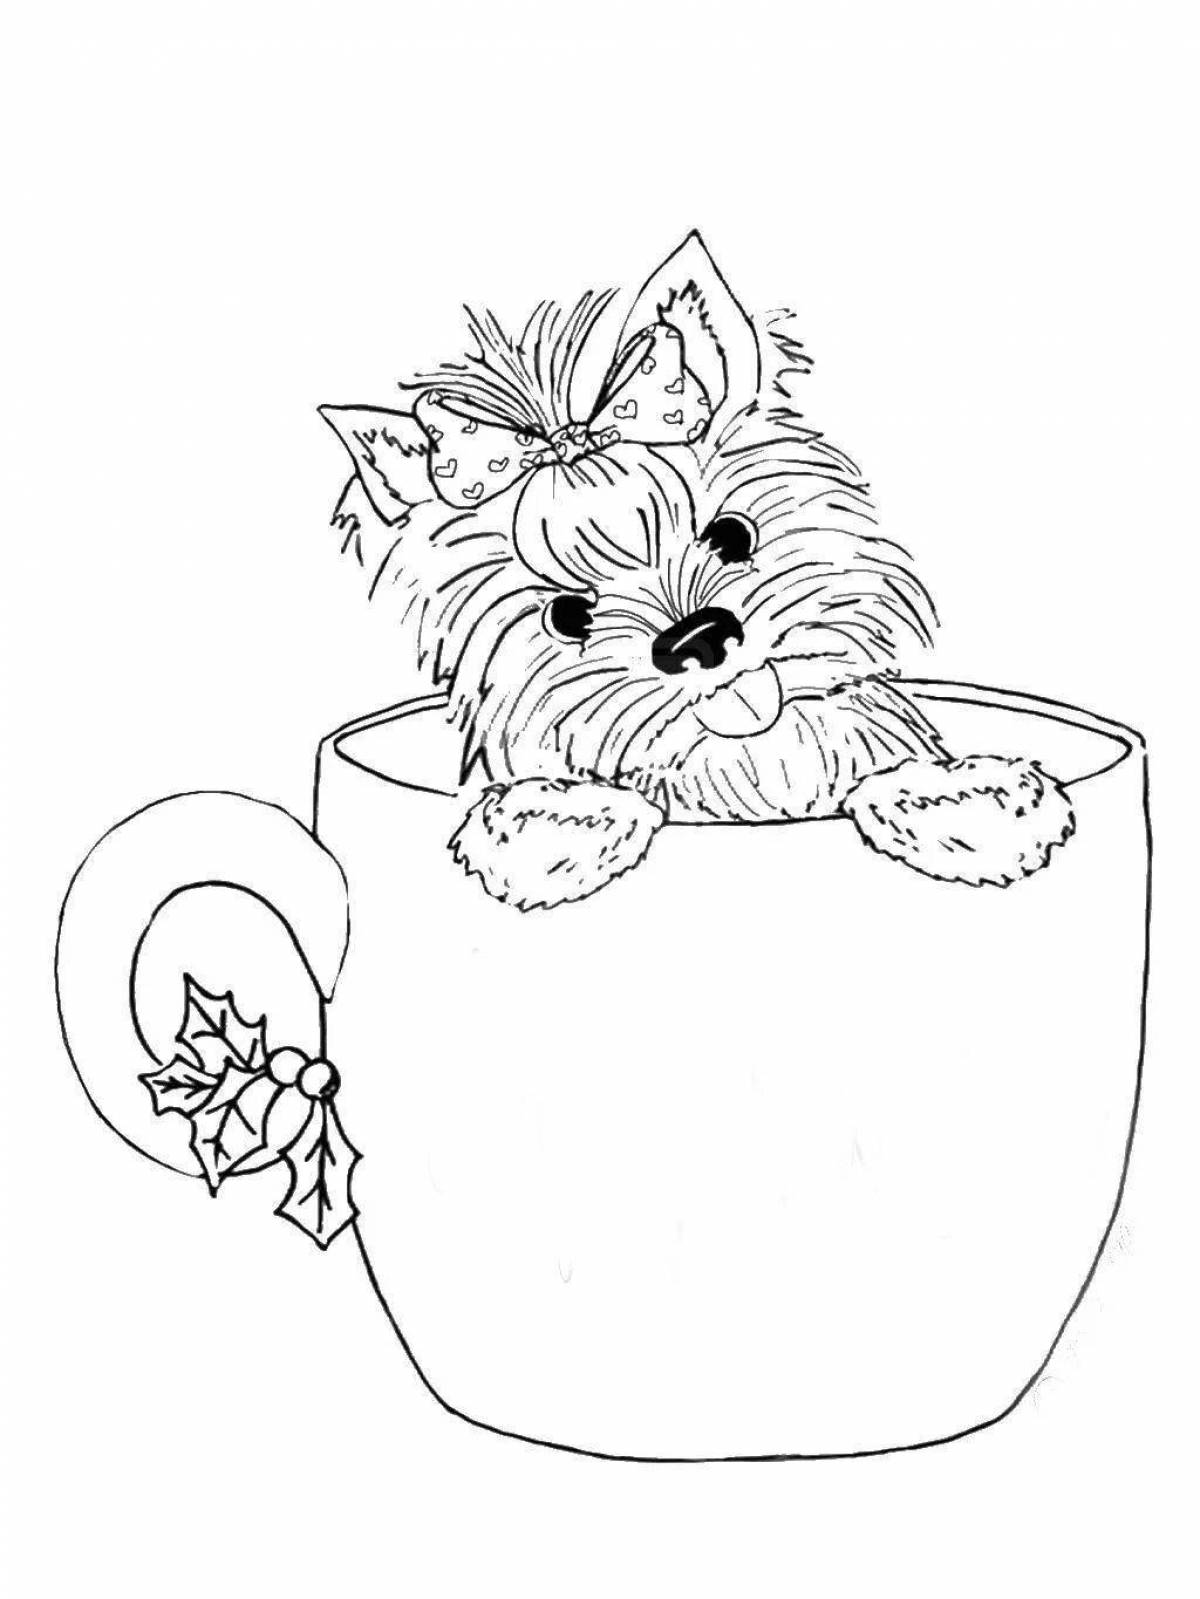 Jolly yorkshire terrier coloring pages for kids